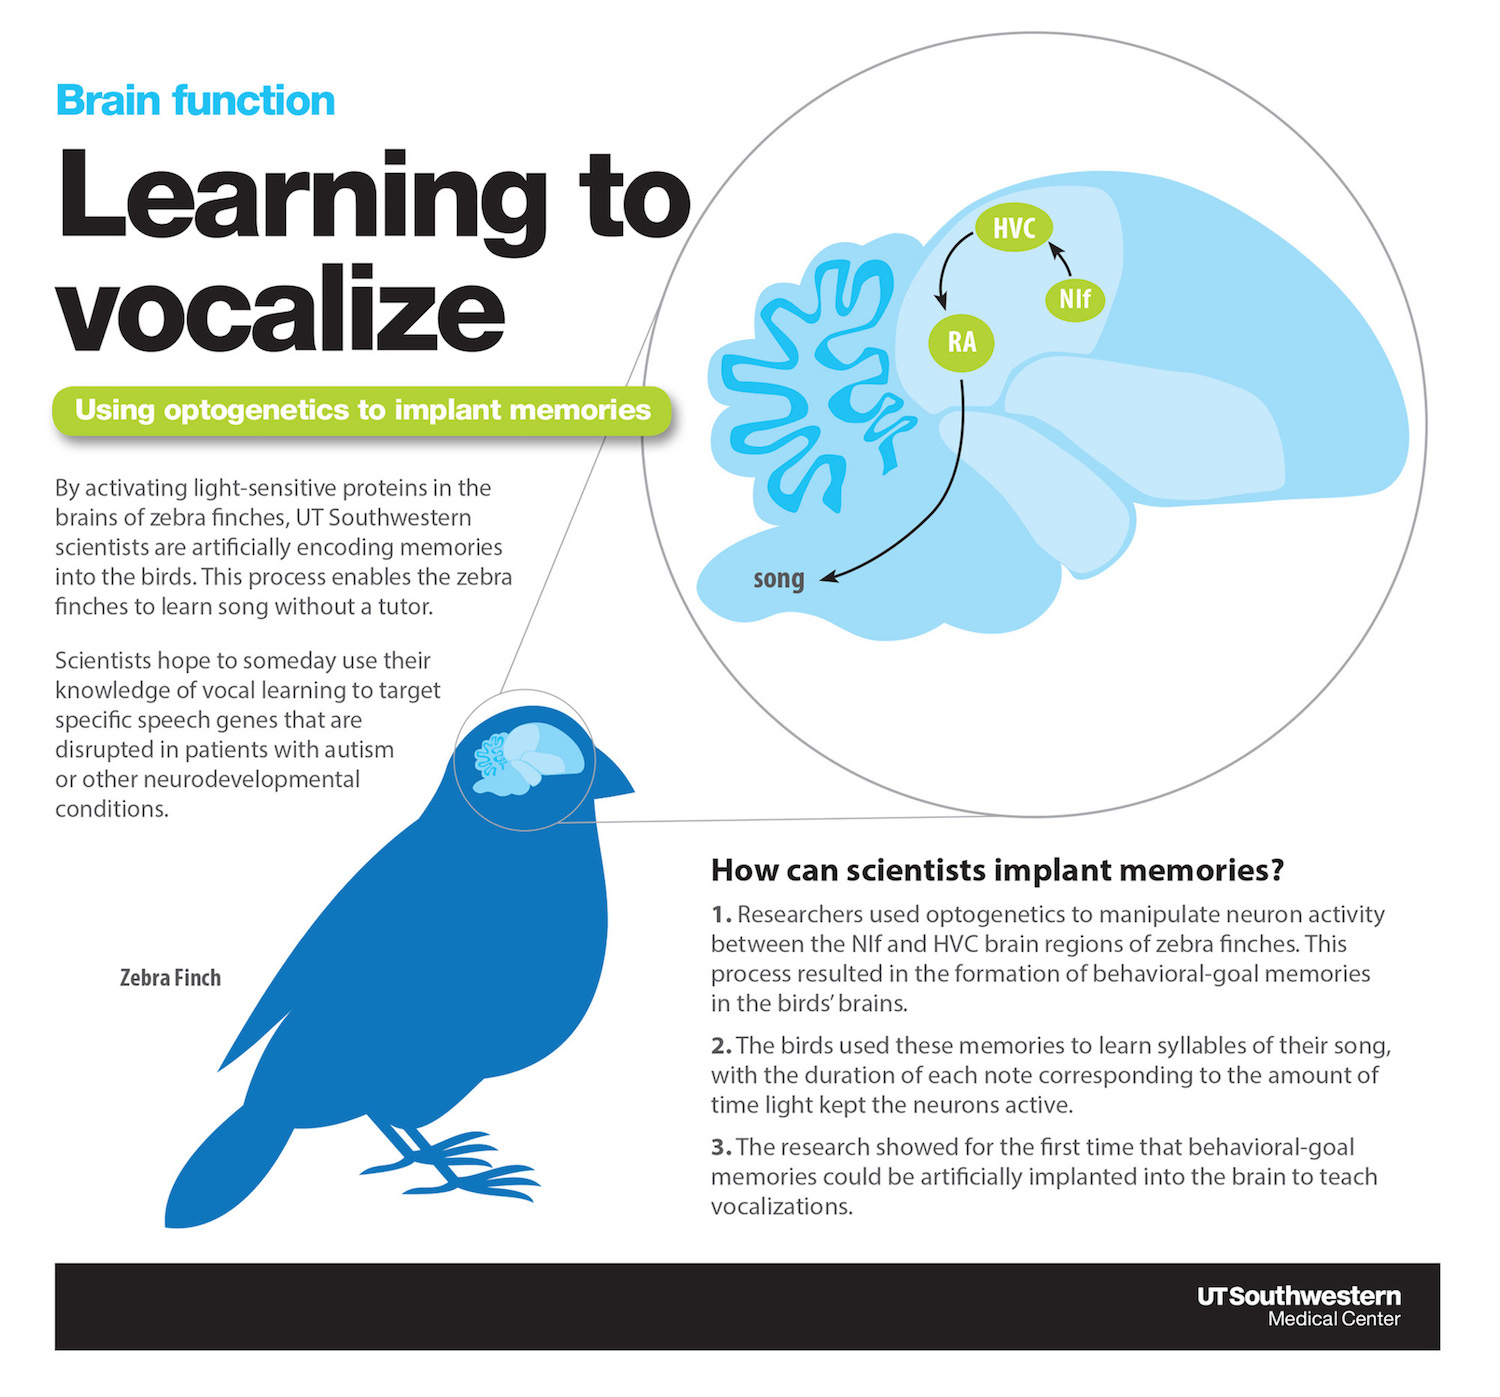 Vocal learning infographic: Learning to vocalize. Using optogenetics to implant memories
By activating light-sensitive proteins in the brains of zebra finches, UT Southwestern scientists are artificially encoding memories into the birds. This process enables the zebra finches to learn song without a tutor. Scientists hope to someday use their knowledge of vocal learning to target specific speech genes that are disrupted in patients with autism or other neurodevelopmental conditions. How can scientists implant memories? 1. Researchers used optogenetics to manipulate neuron activity between the NIf and HVC brain regions of zebra finches. This process resulted in the formation of behavioral-goal memories in the birds’ brains. 2. The birds used these memories to learn syllables of their song, with the duration of each note corresponding to the amount of time light kept the neurons active. 3. The research showed for the first time that behavioral-goal memories could be artificially implanted into the brain to teach vocalizations.